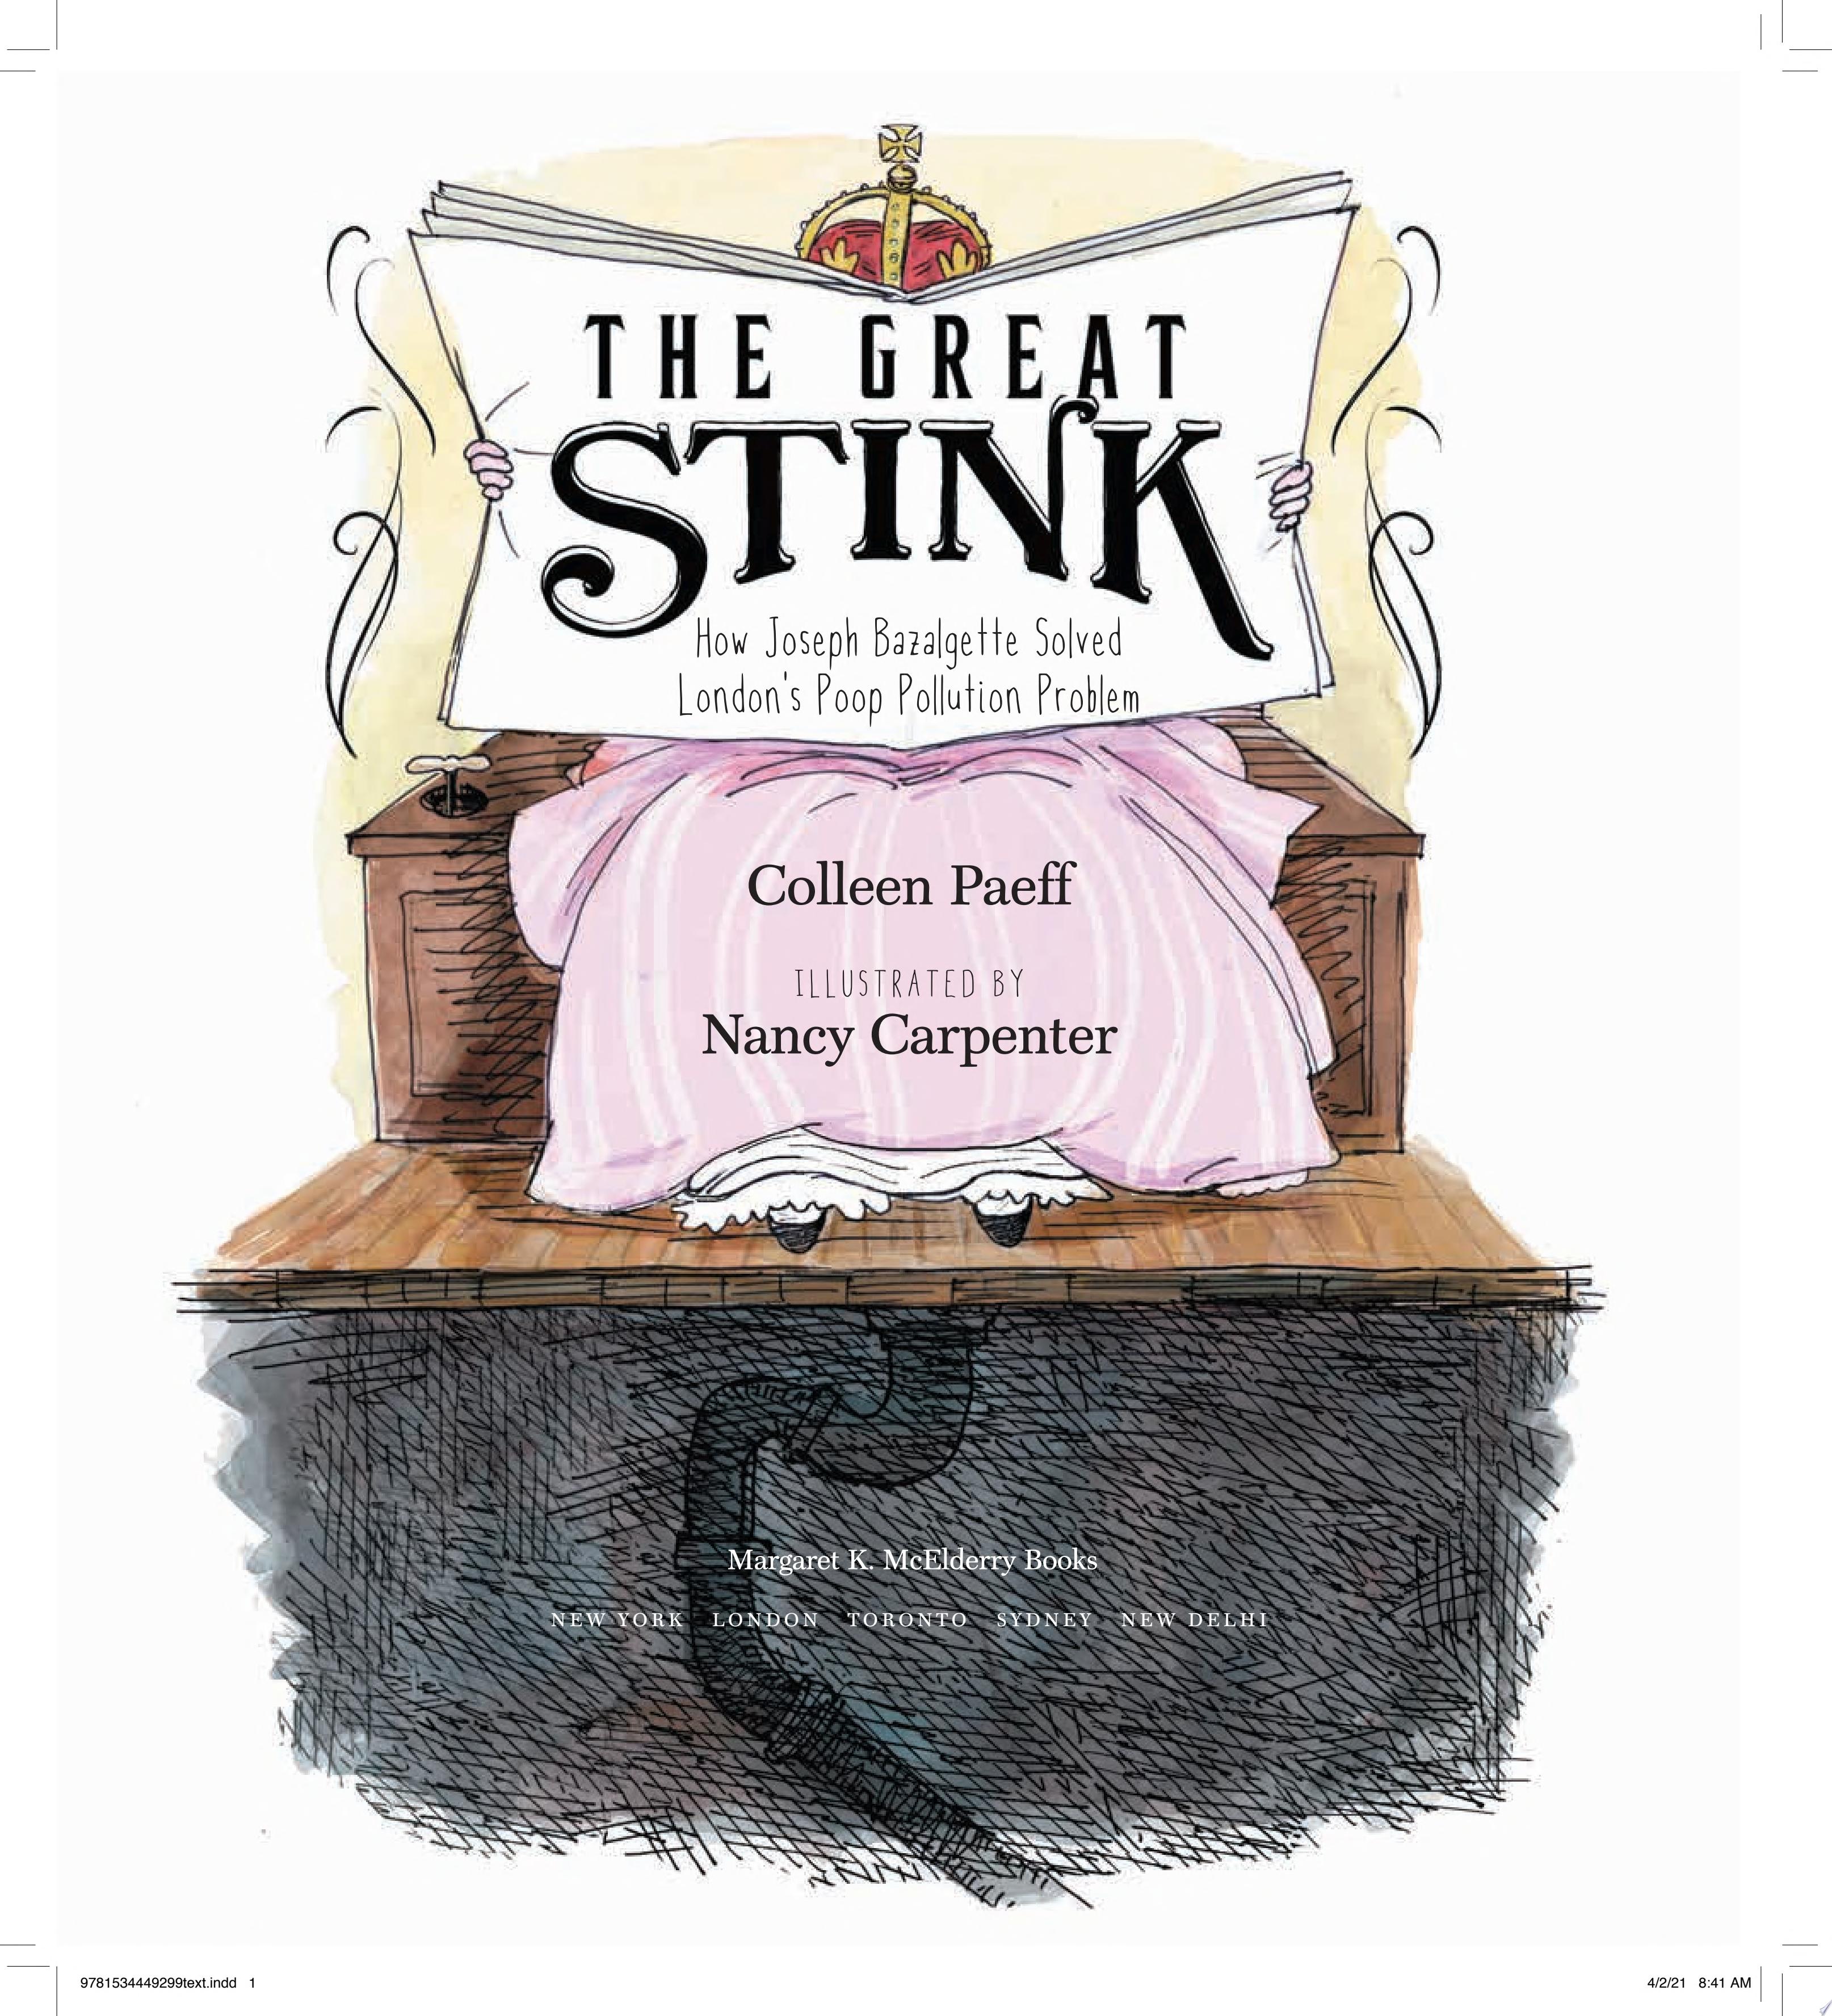 Image for "The Great Stink"